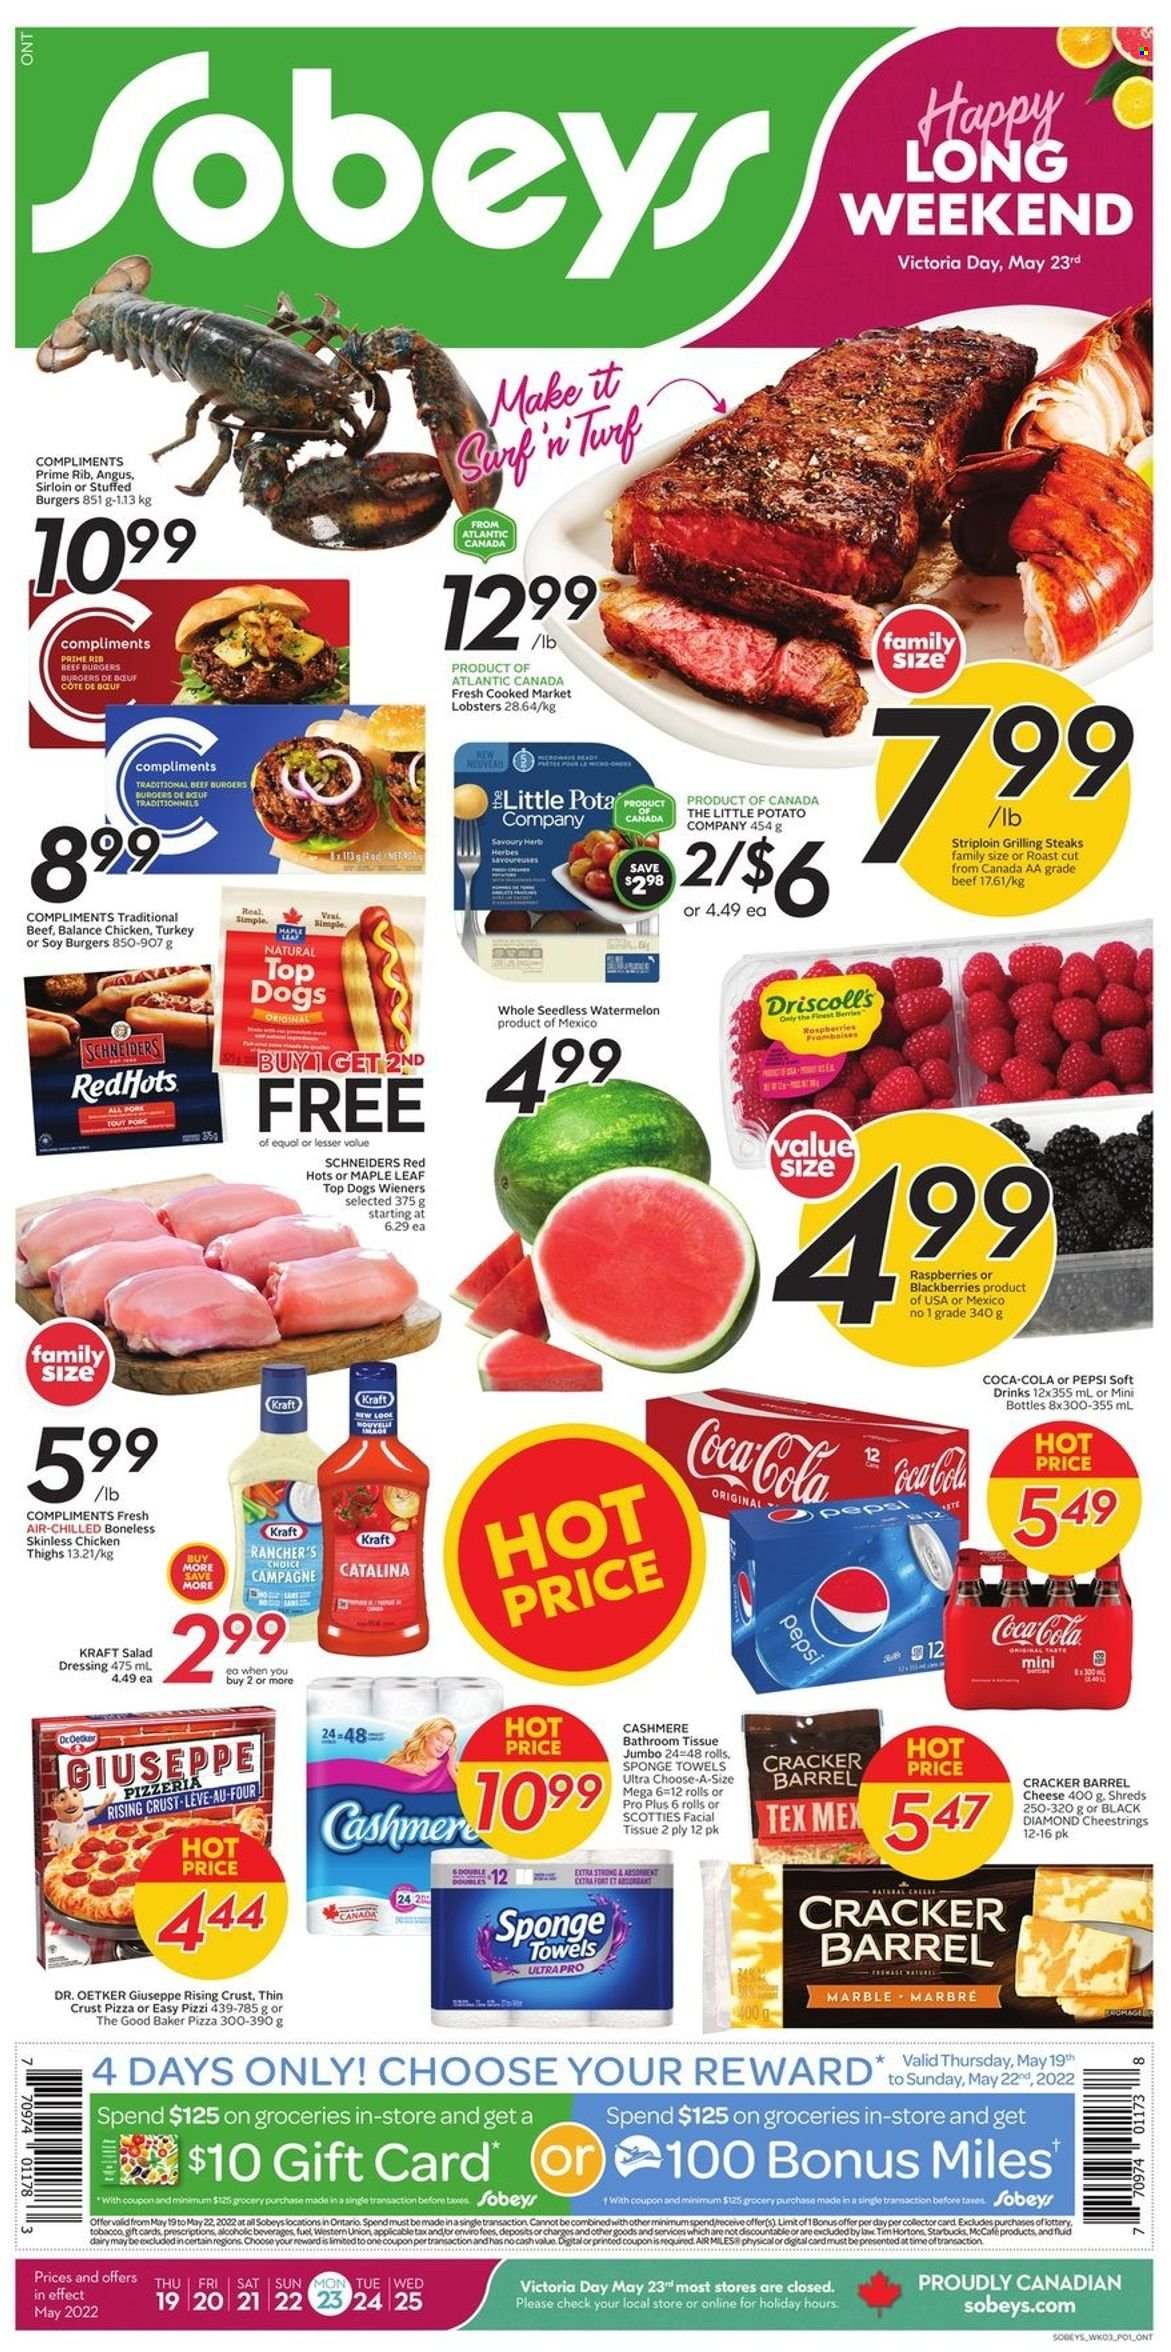 thumbnail - Sobeys Flyer - May 19, 2022 - May 25, 2022 - Sales products - tart, blackberries, raspberries, watermelon, lobster, hamburger, beef burger, Kraft®, roast, sausage, frankfurters, string cheese, cheese, Dr. Oetker, salad dressing, dressing, Coca-Cola, Pepsi, soft drink, carbonated soft drink, Starbucks, McCafe, chicken thighs, chicken, steak, bath tissue, kitchen towels, paper towels, facial tissues. Page 1.